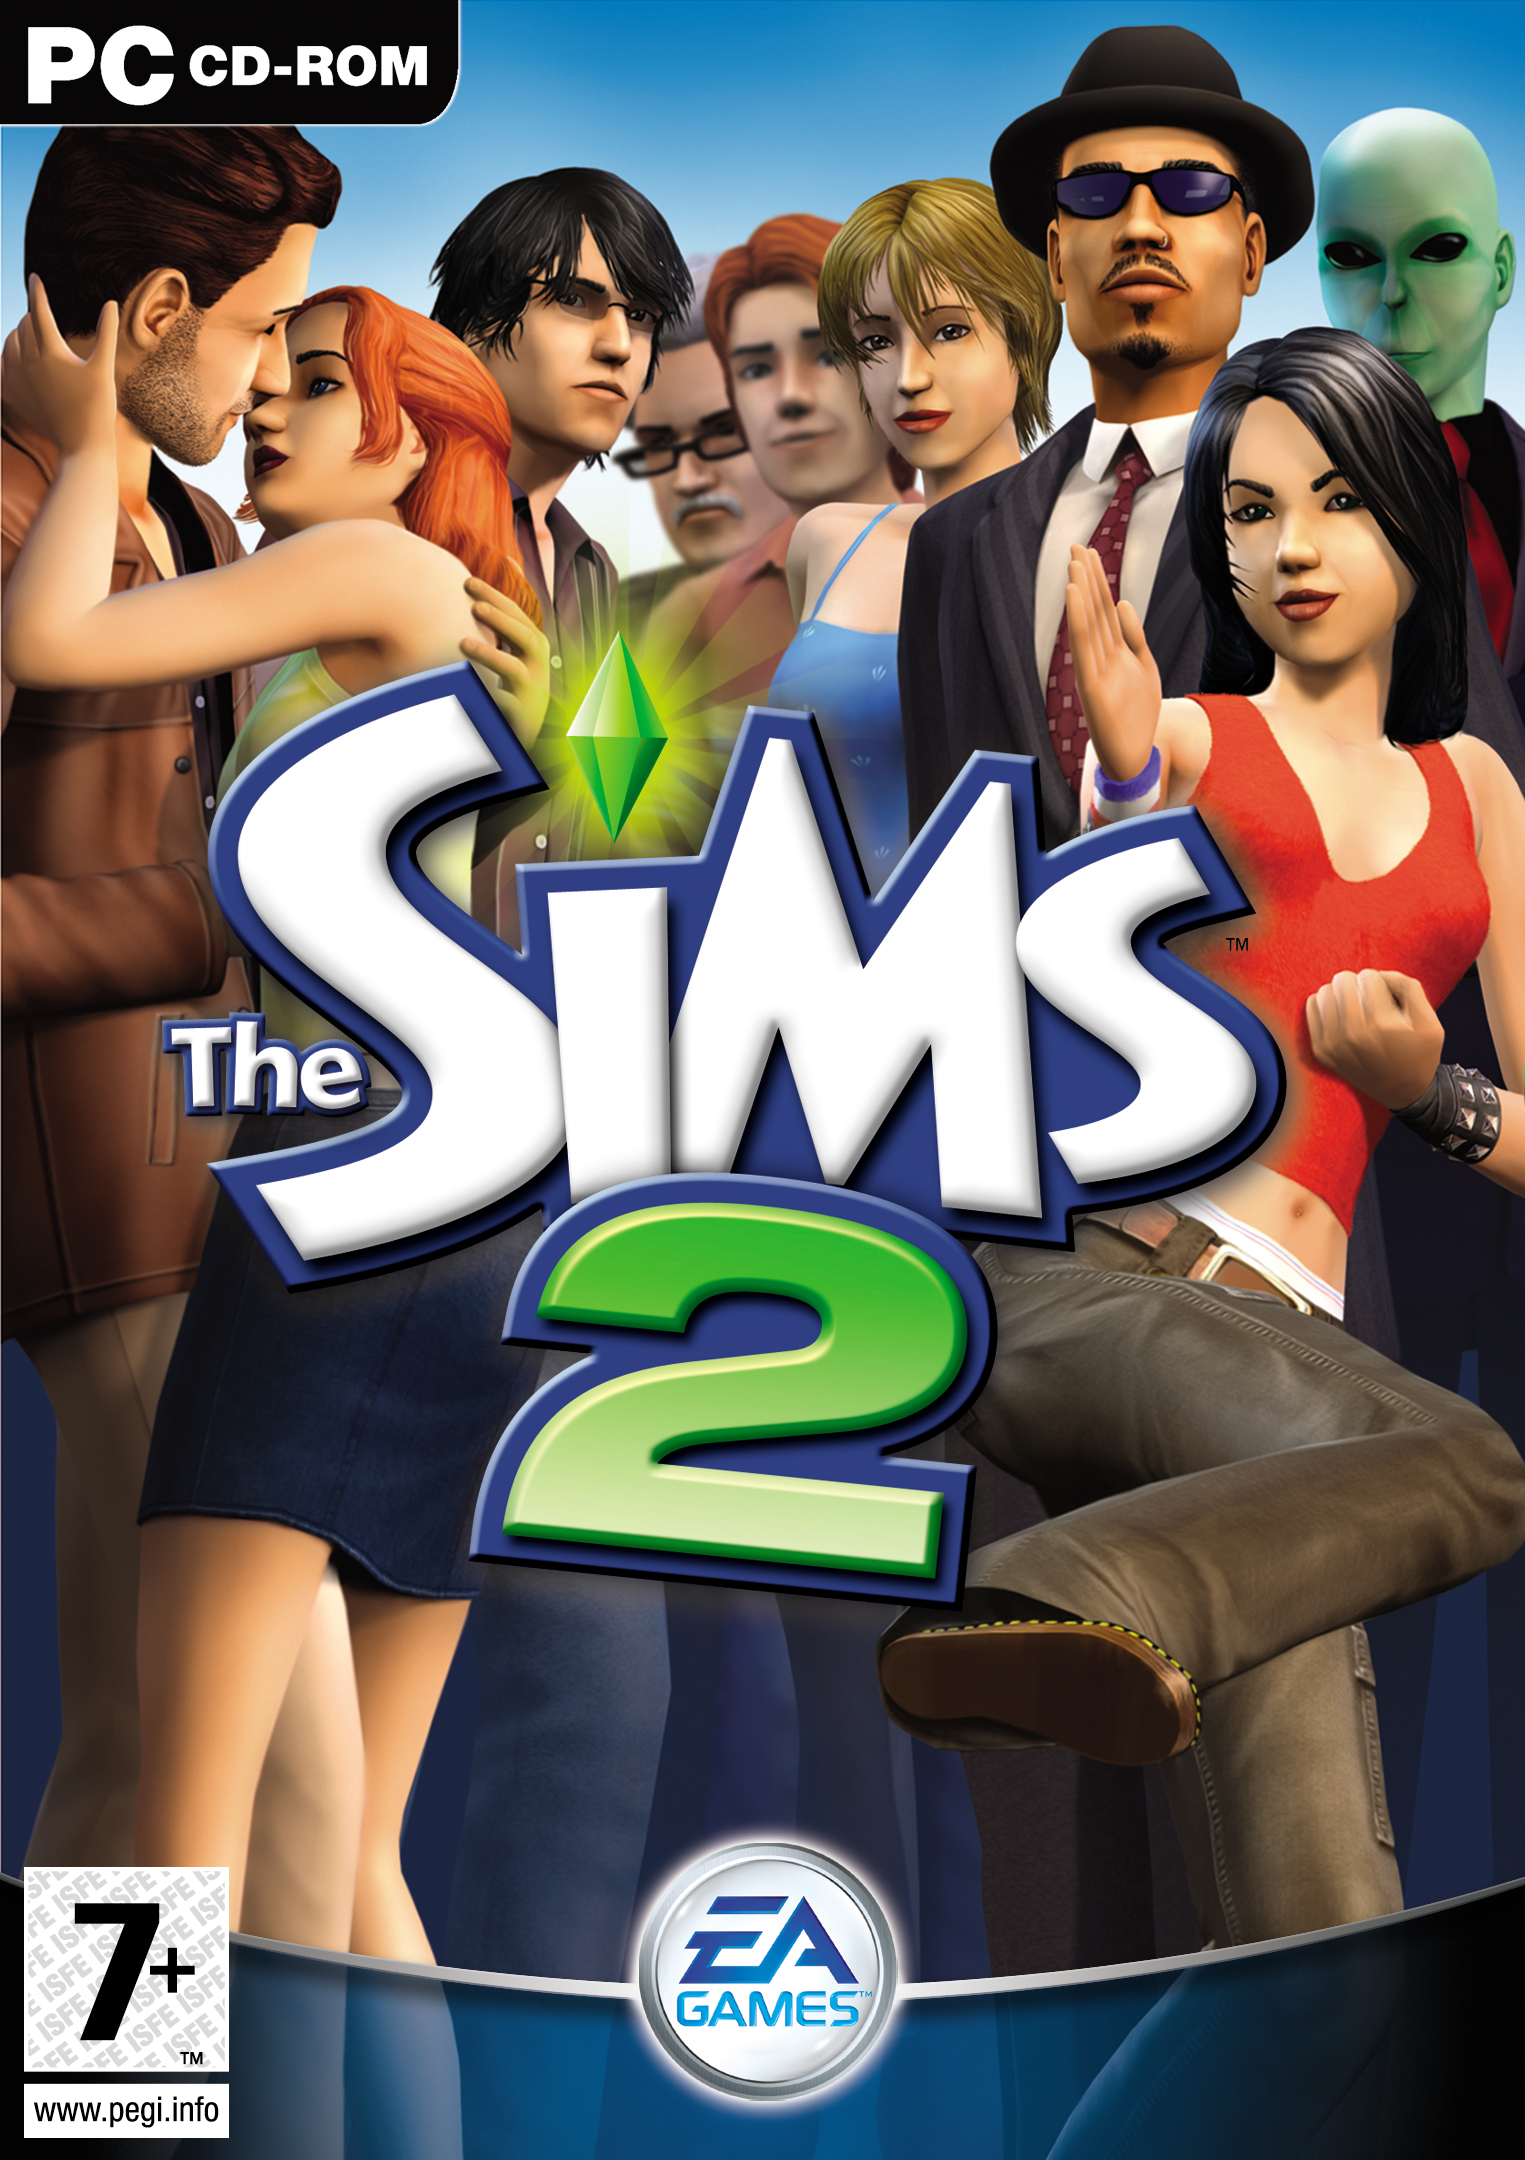 cheat codes for the sims life stories pc game